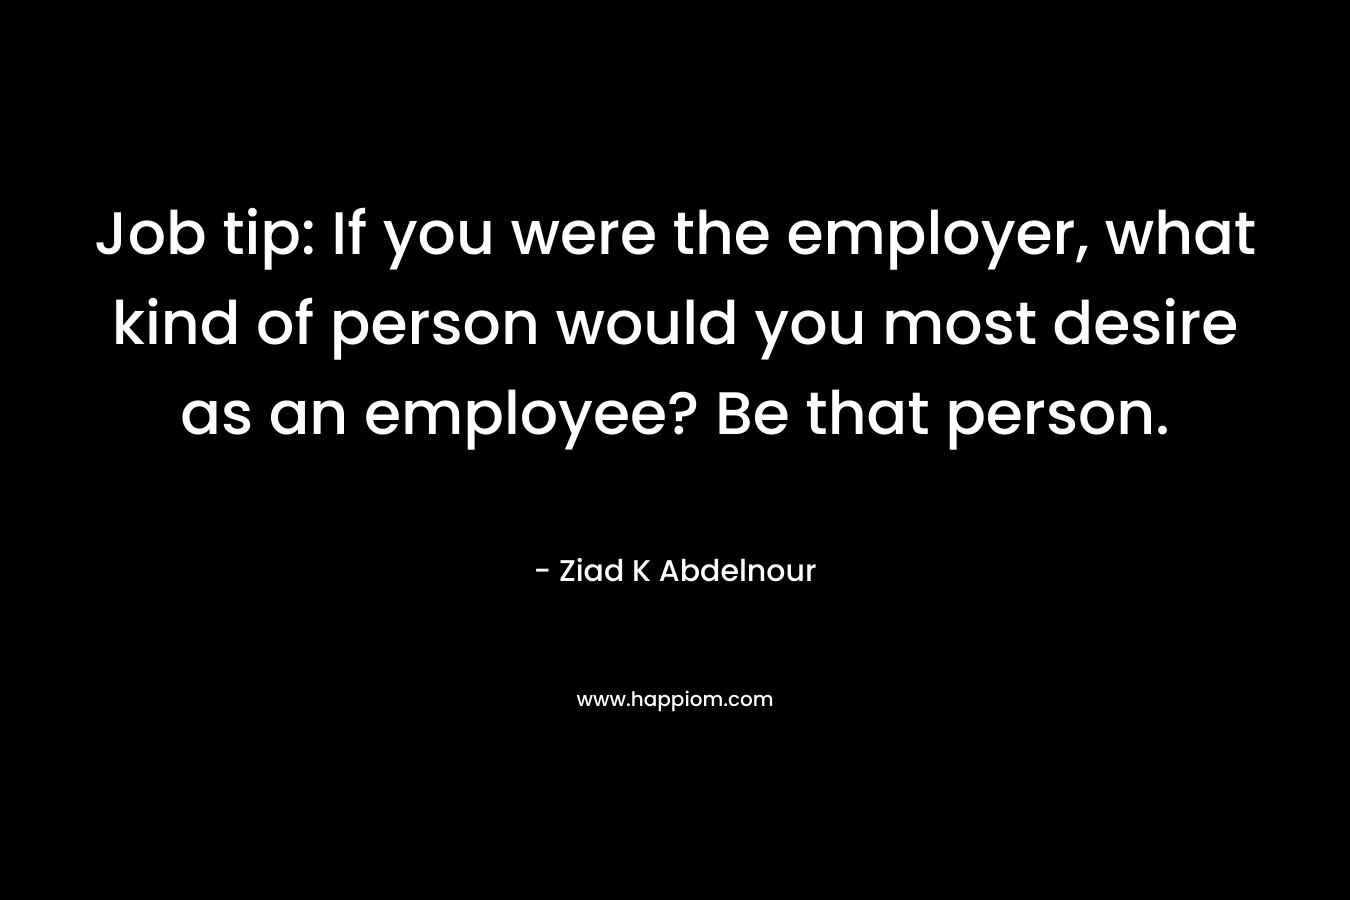 Job tip: If you were the employer, what kind of person would you most desire as an employee? Be that person. – Ziad K Abdelnour